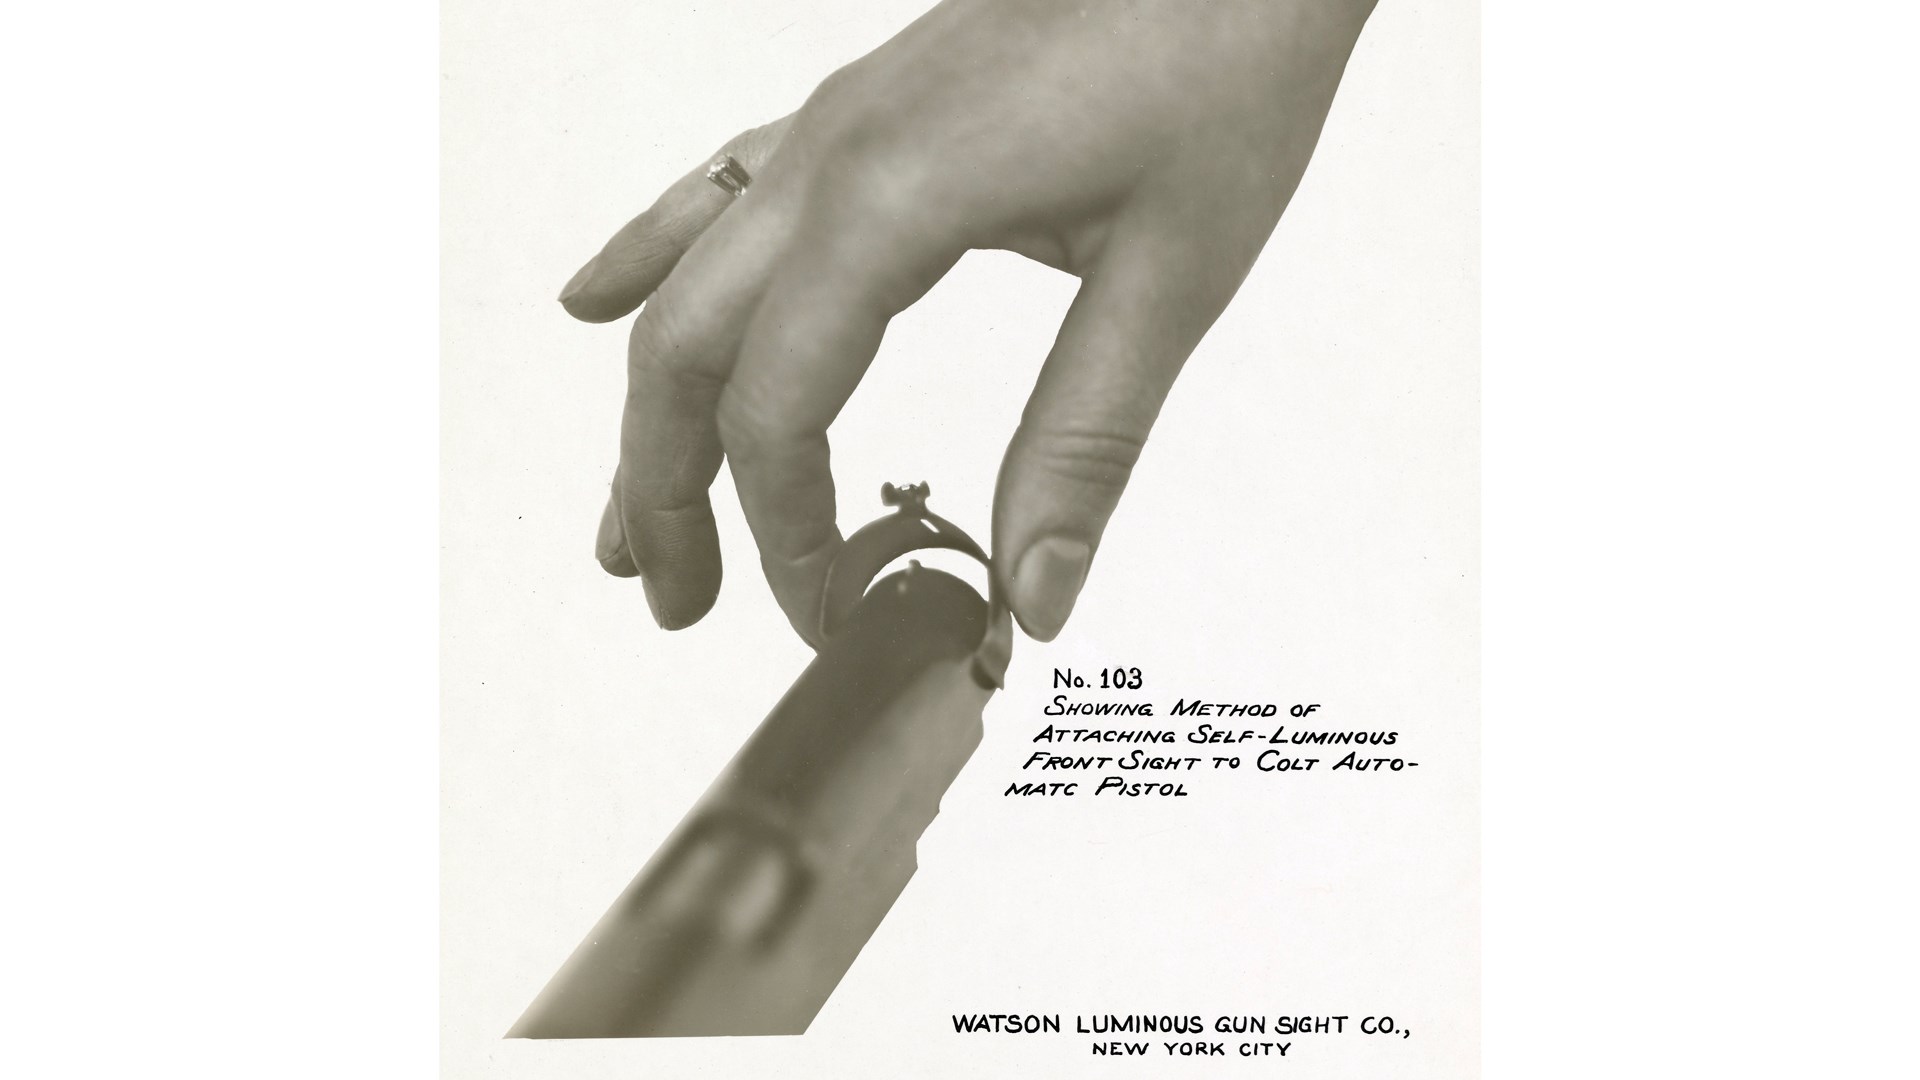 hand with ring placing part on gun luminuous paint vintage photograph text on image describing action